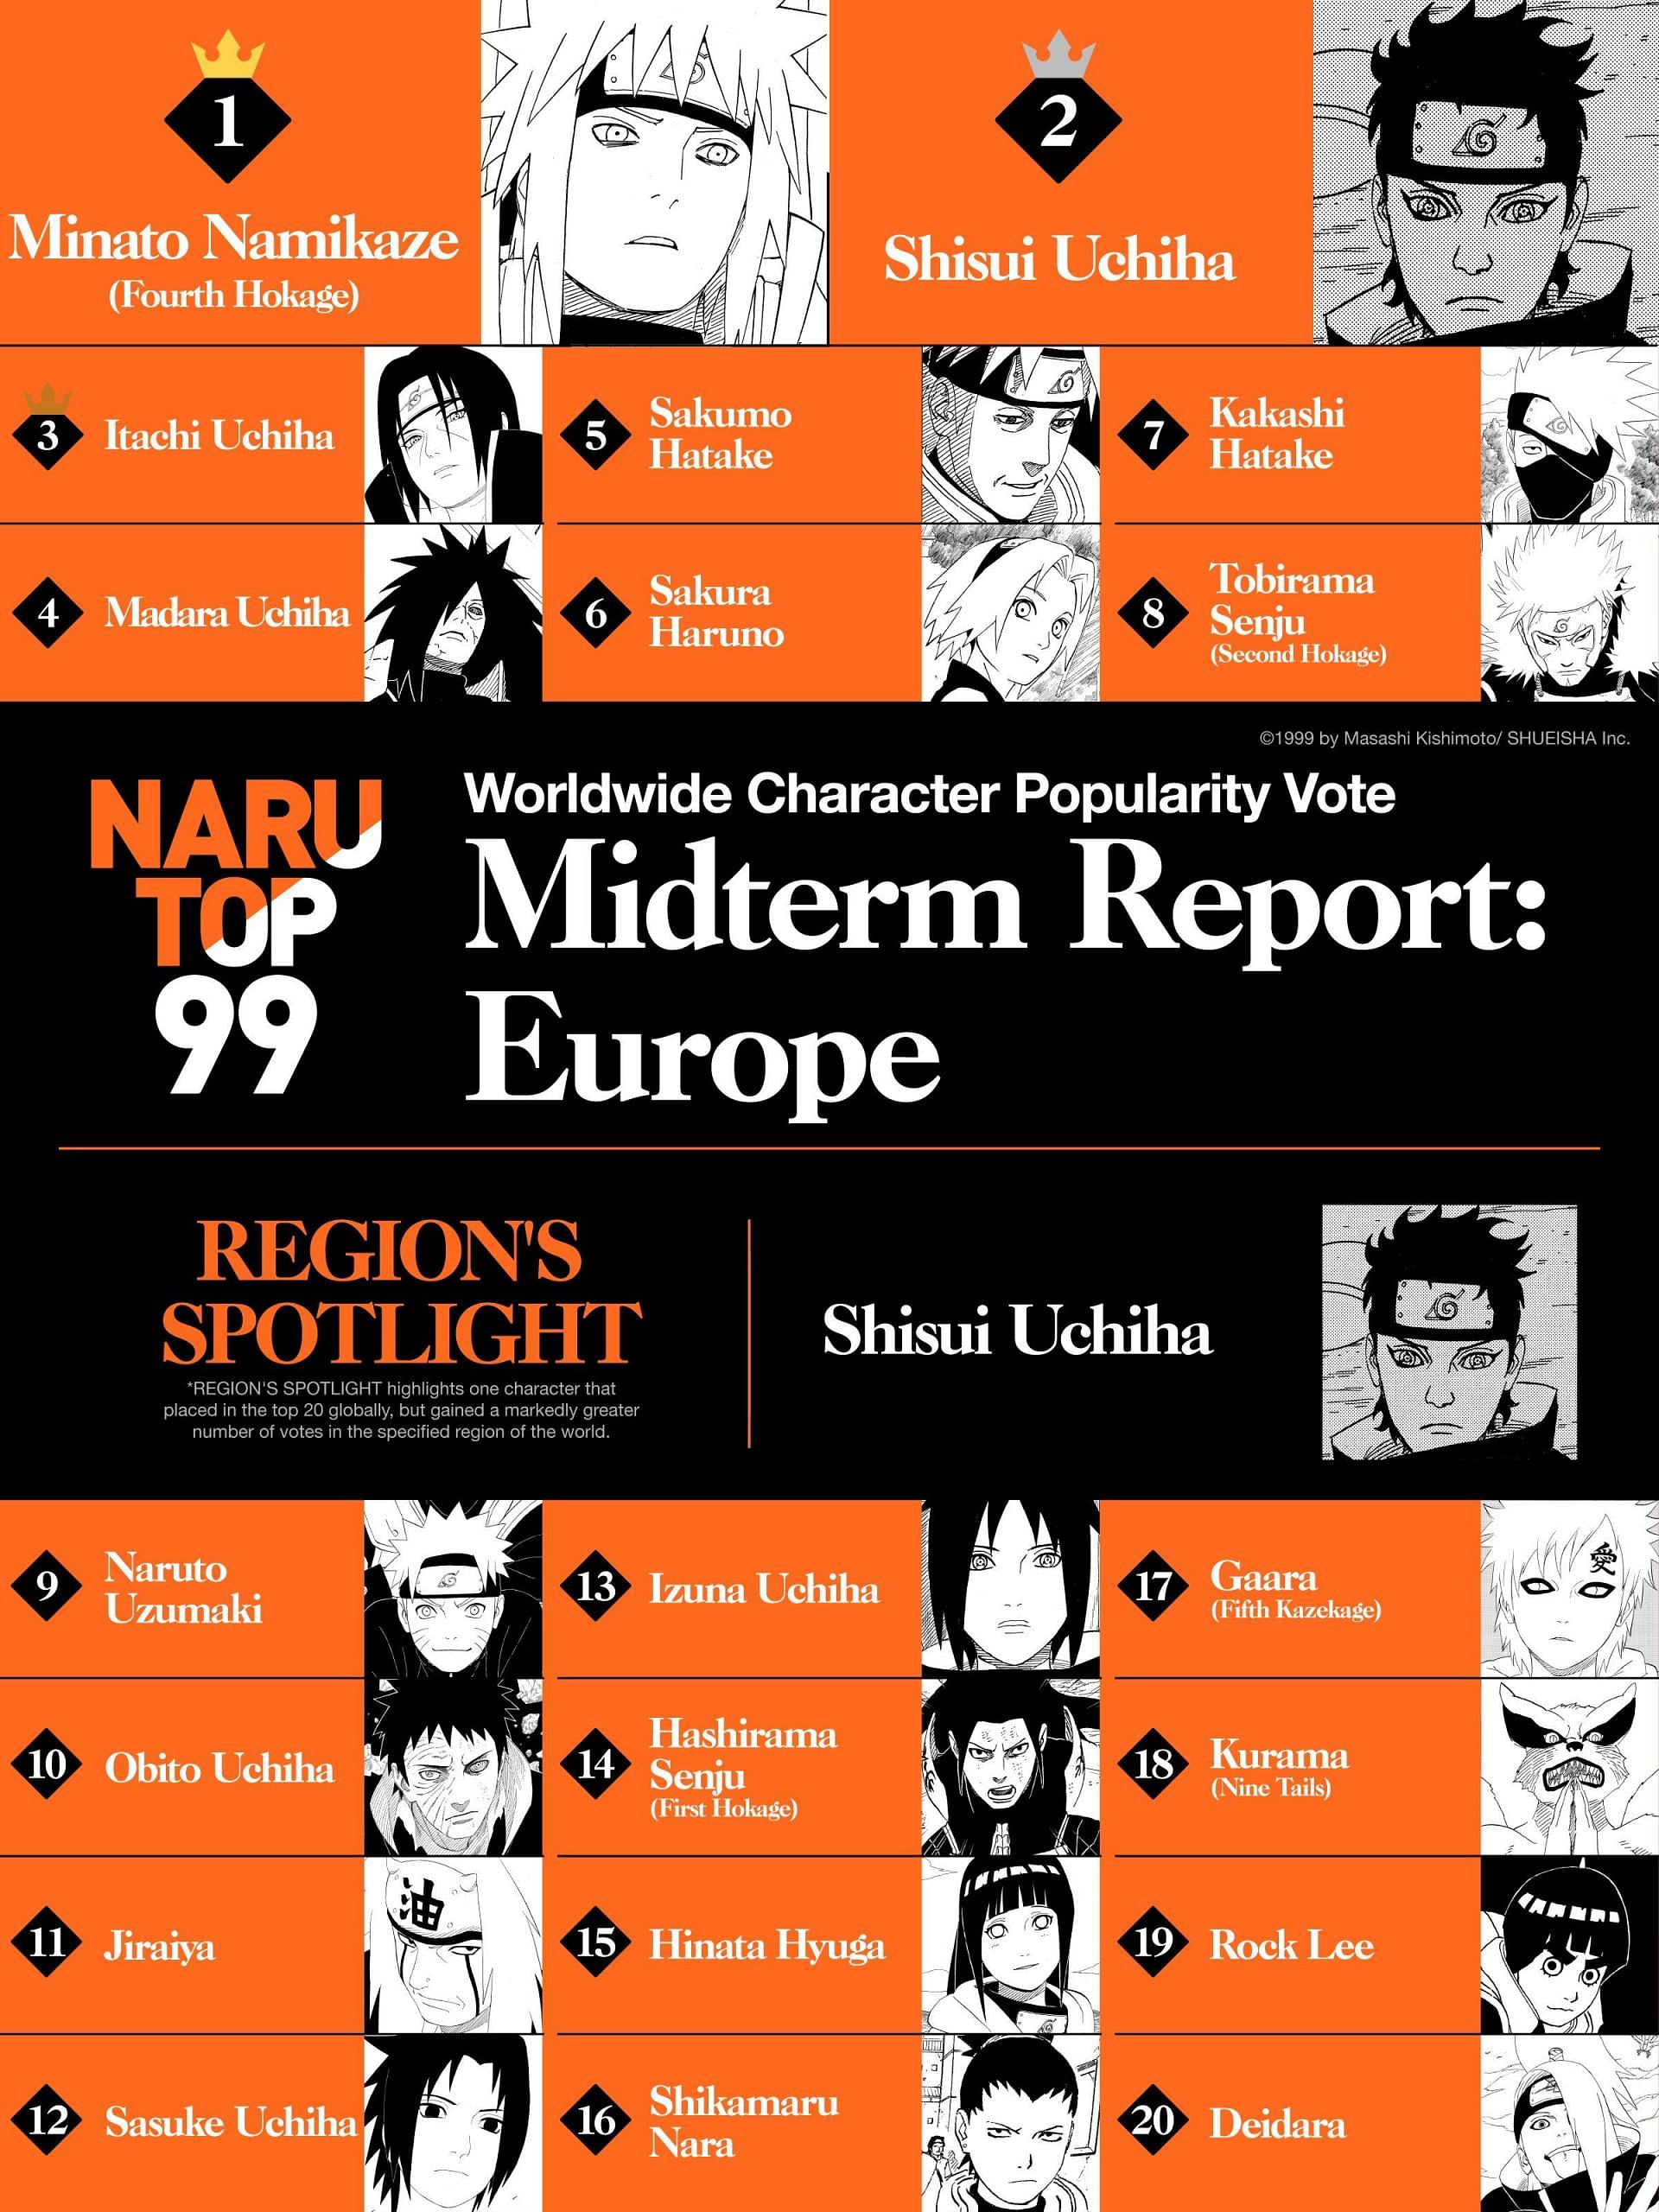 Narutop99 results so far: Top 10 characters, according to polls